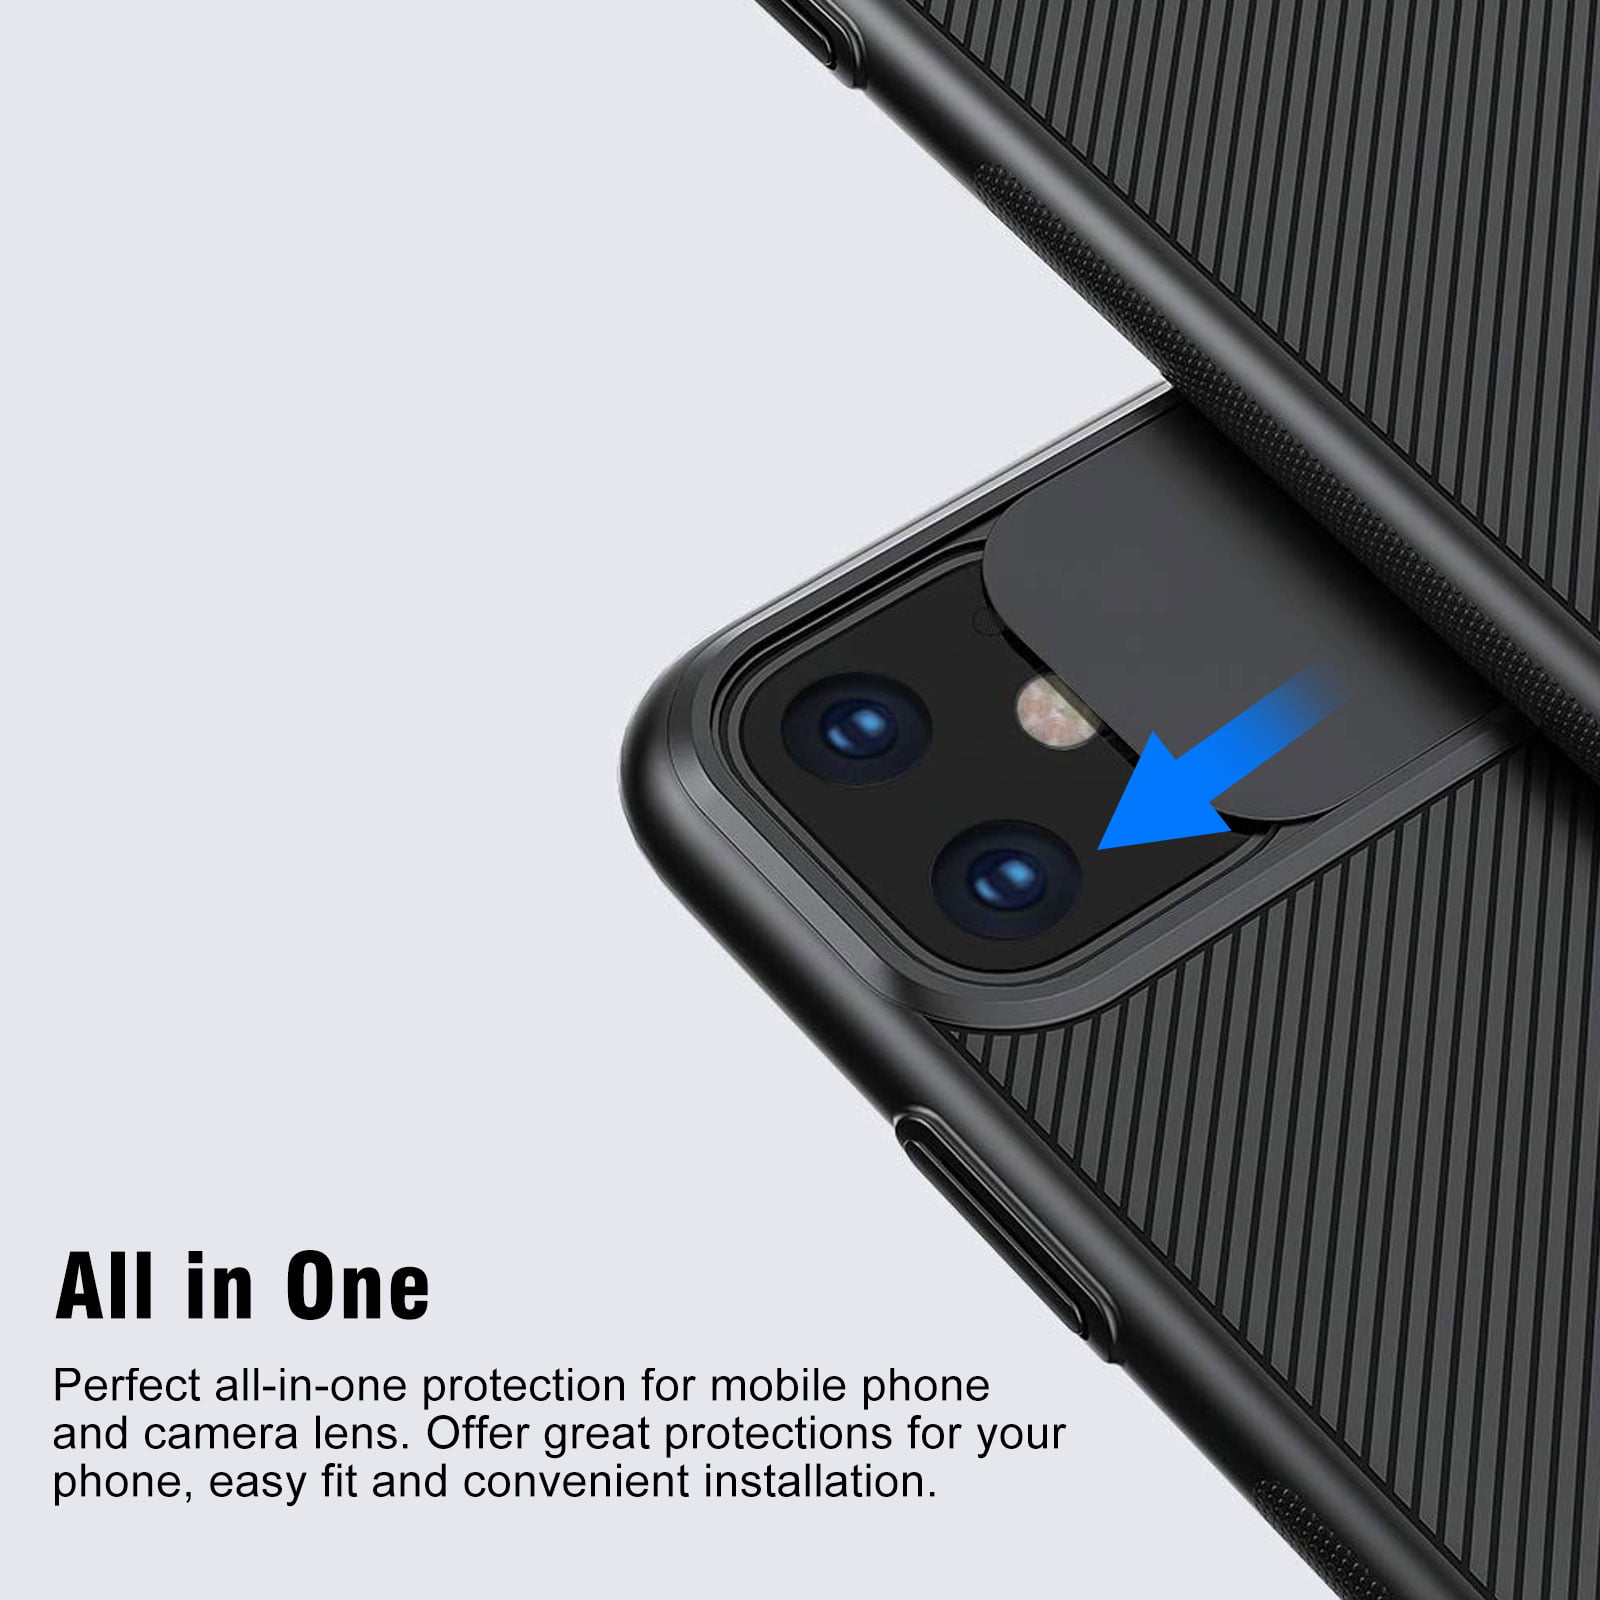 ShiftCam case adds even more lenses to iPhone 11, 11 Pro, 11 Pro Max - CNET